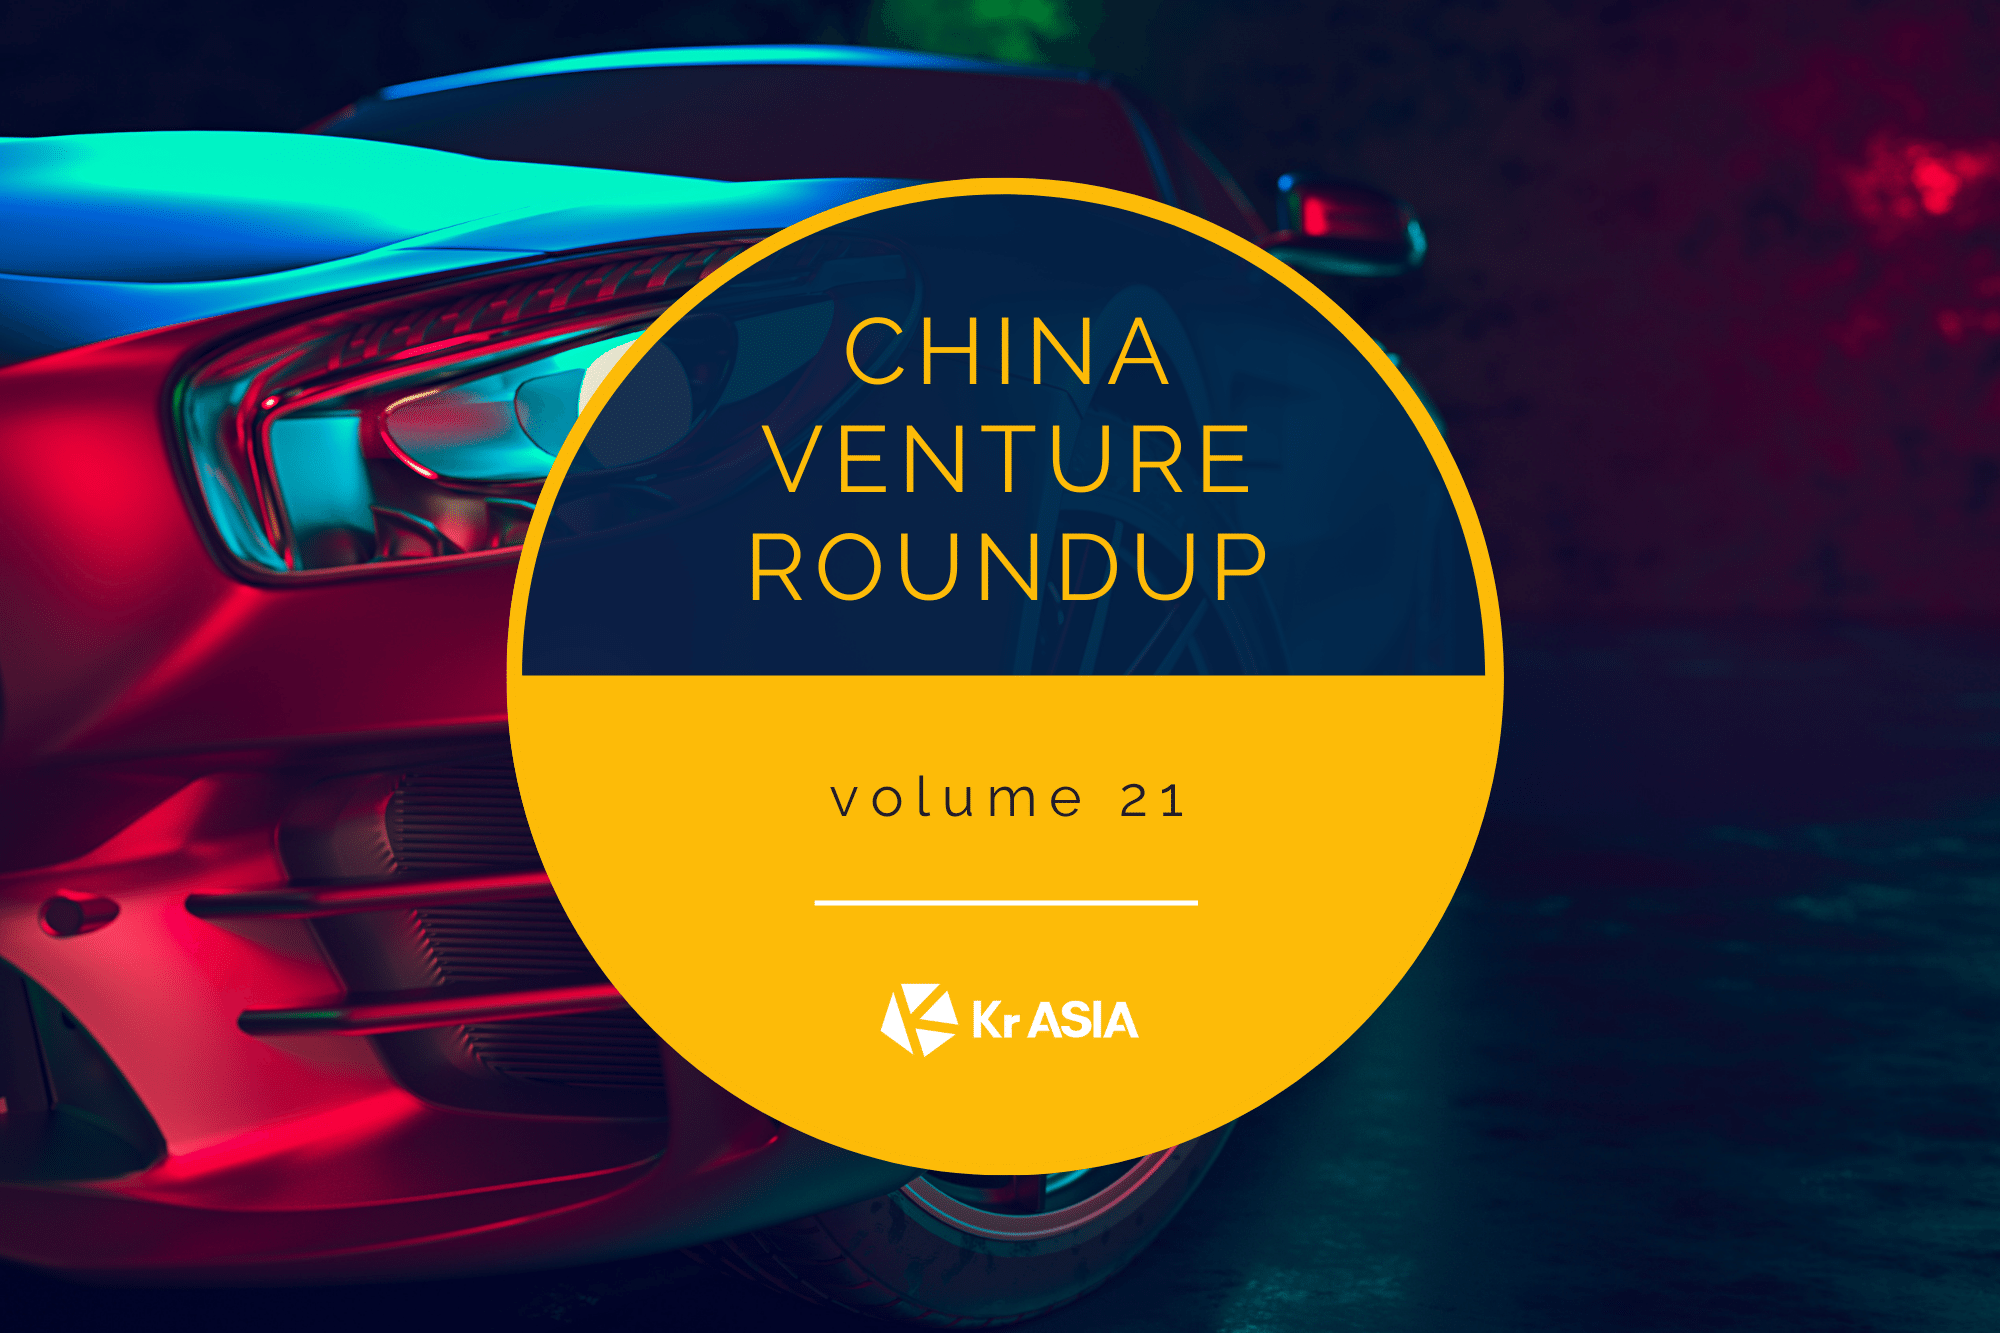 Temasek-backed Didi Freight competes with Lalamove | China Venture Roundup Volume 21